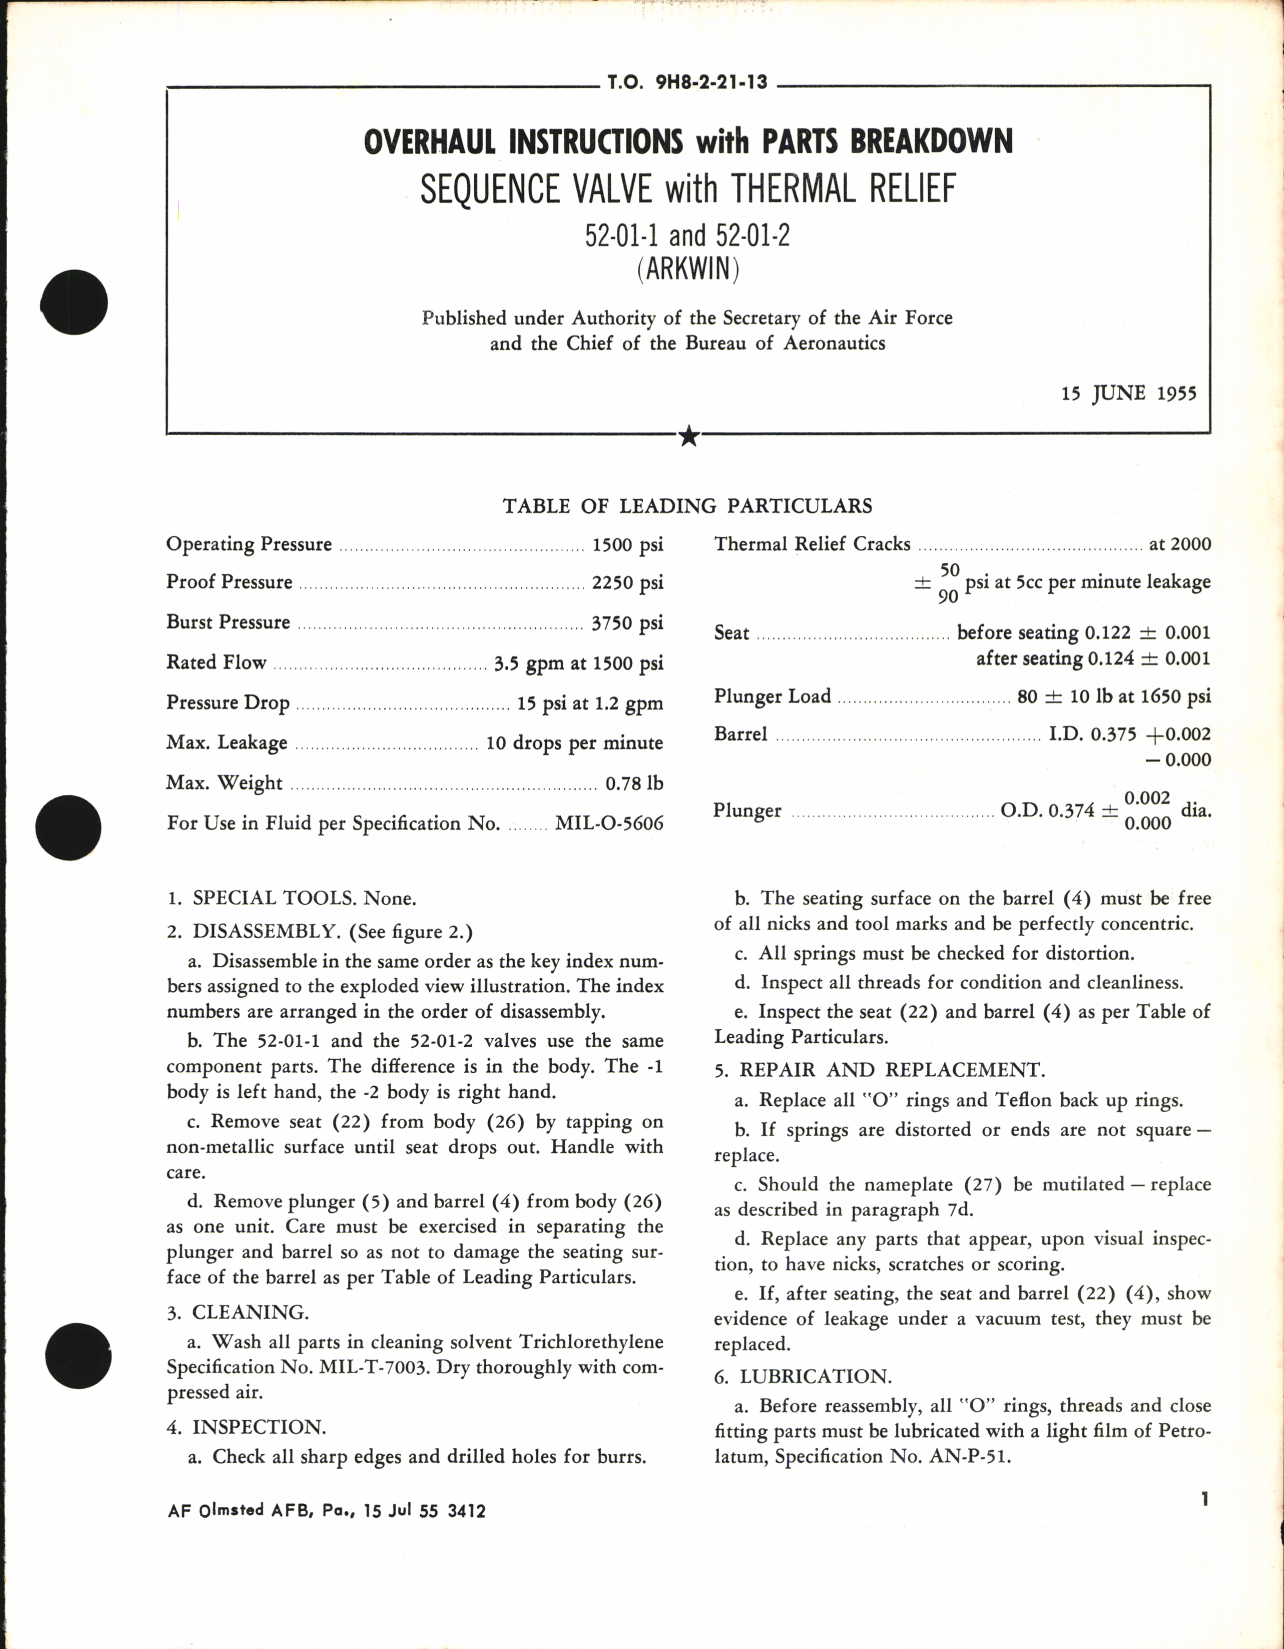 Sample page 1 from AirCorps Library document: Overhaul Instructions with Parts Breakdown for Sequence Valve with Thermal Relief 52-01-1 and 52-01-2